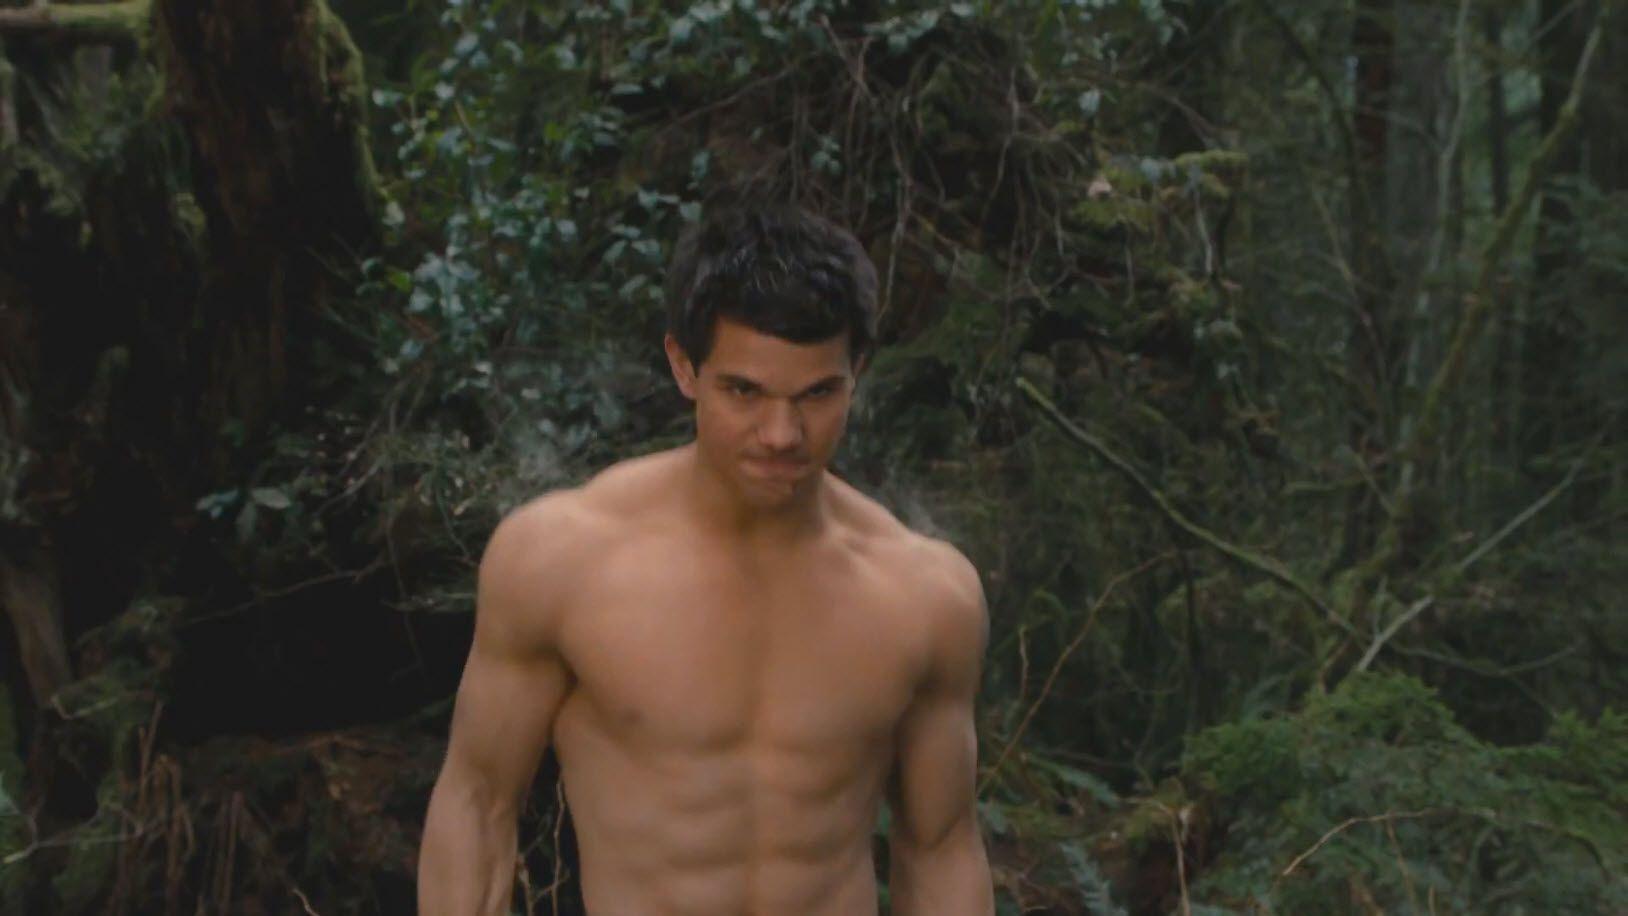 image For > Taylor Lautner 2013 Shirtless